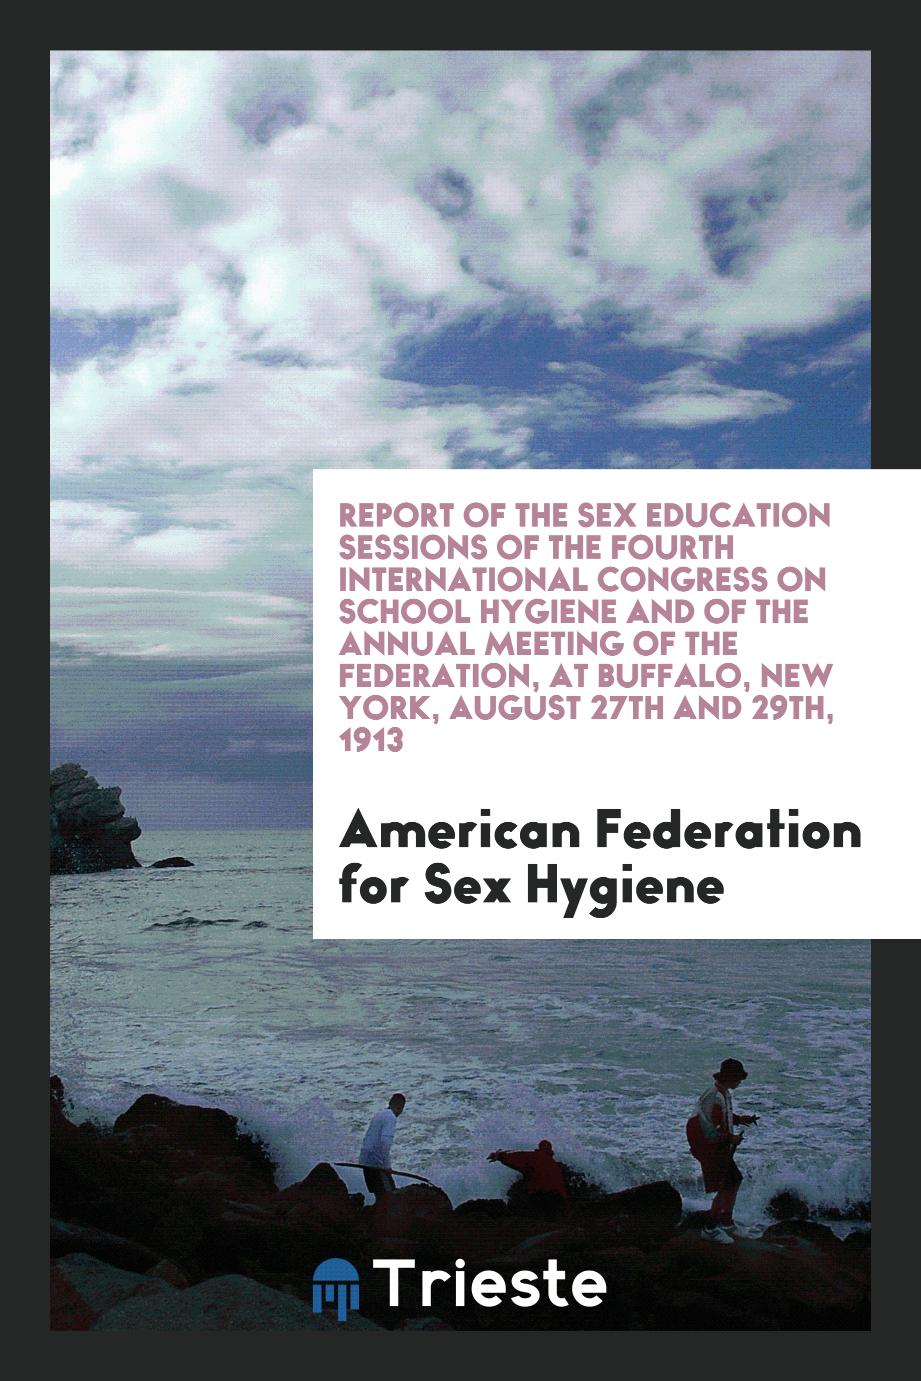 Report of the Sex Education Sessions of the Fourth International Congress on School Hygiene and of the Annual Meeting of the Federation, at Buffalo, New York, August 27th and 29th, 1913